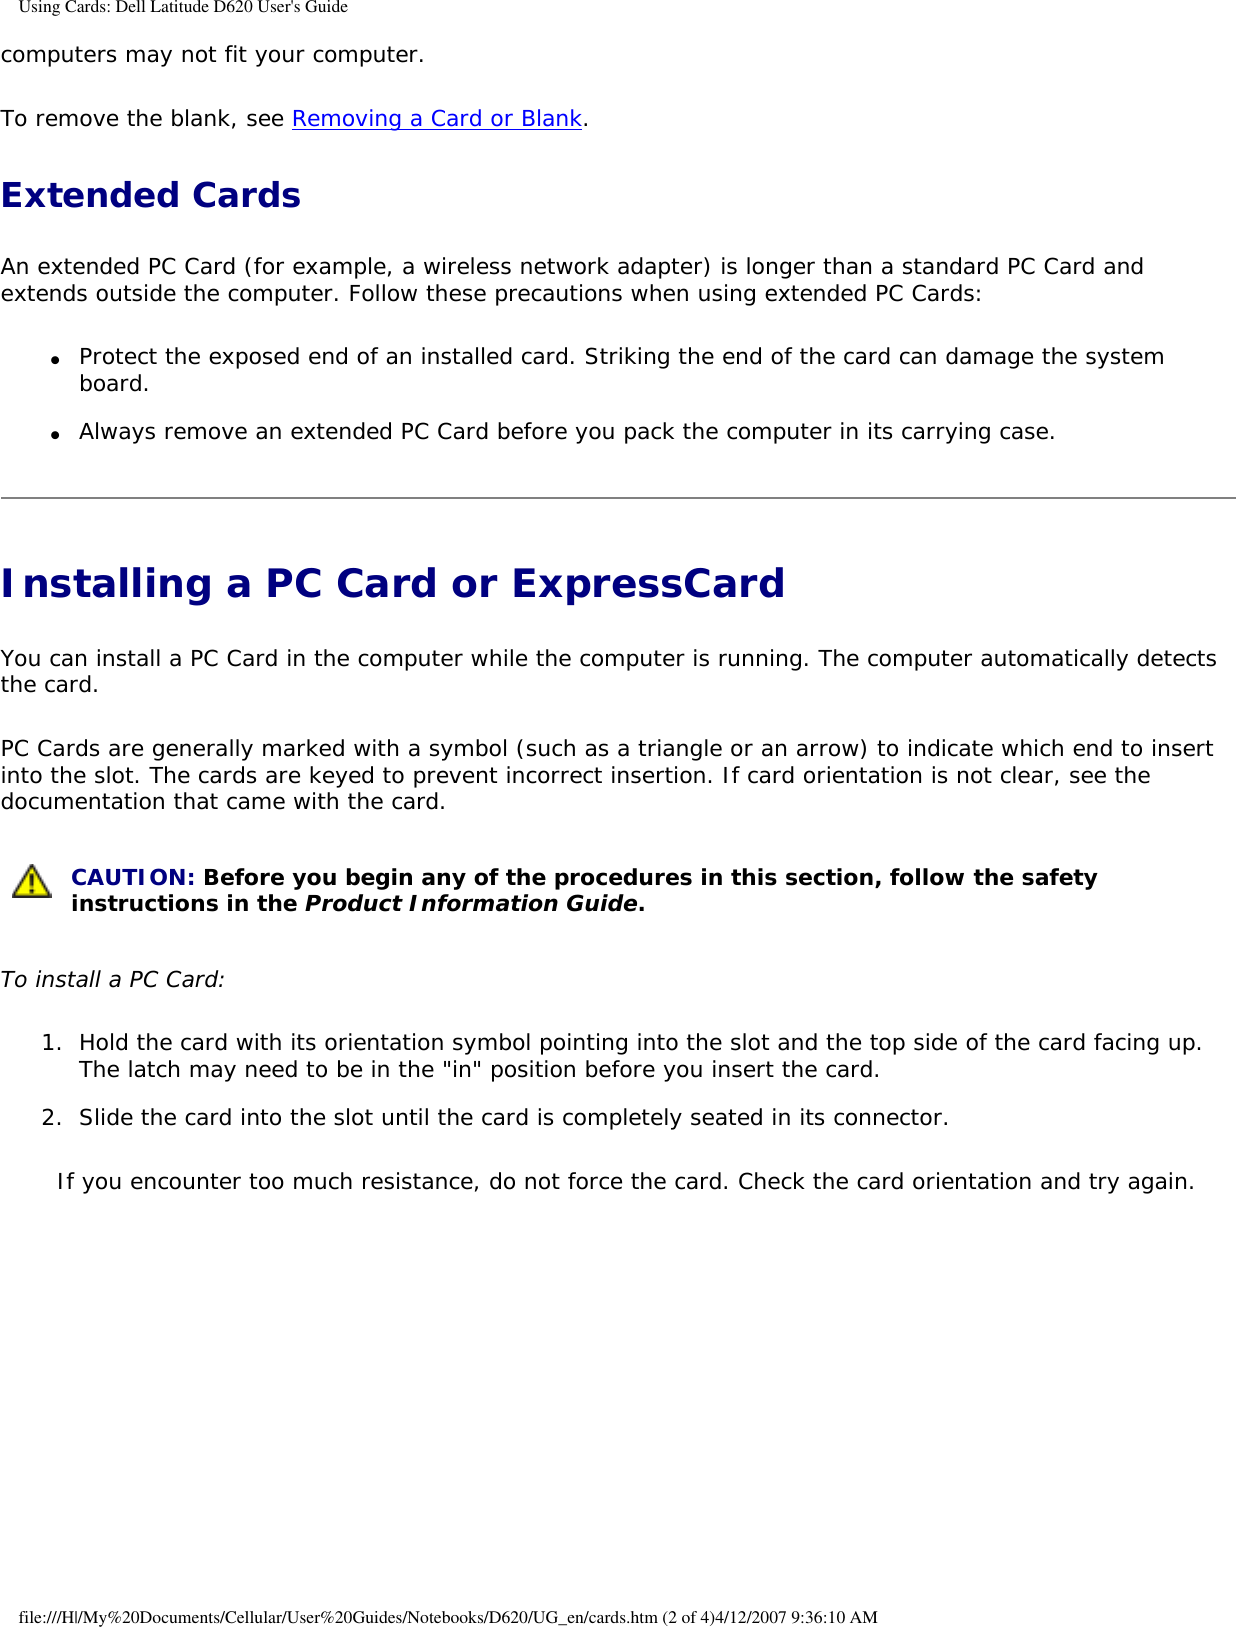 Using Cards: Dell Latitude D620 User&apos;s Guidecomputers may not fit your computer.To remove the blank, see Removing a Card or Blank.Extended CardsAn extended PC Card (for example, a wireless network adapter) is longer than a standard PC Card and extends outside the computer. Follow these precautions when using extended PC Cards:●     Protect the exposed end of an installed card. Striking the end of the card can damage the system board.  ●     Always remove an extended PC Card before you pack the computer in its carrying case.  Installing a PC Card or ExpressCard You can install a PC Card in the computer while the computer is running. The computer automatically detects the card.PC Cards are generally marked with a symbol (such as a triangle or an arrow) to indicate which end to insert into the slot. The cards are keyed to prevent incorrect insertion. If card orientation is not clear, see the documentation that came with the card.  CAUTION: Before you begin any of the procedures in this section, follow the safety instructions in the Product Information Guide.To install a PC Card:1.  Hold the card with its orientation symbol pointing into the slot and the top side of the card facing up. The latch may need to be in the &quot;in&quot; position before you insert the card.   2.  Slide the card into the slot until the card is completely seated in its connector.   If you encounter too much resistance, do not force the card. Check the card orientation and try again. file:///H|/My%20Documents/Cellular/User%20Guides/Notebooks/D620/UG_en/cards.htm (2 of 4)4/12/2007 9:36:10 AM